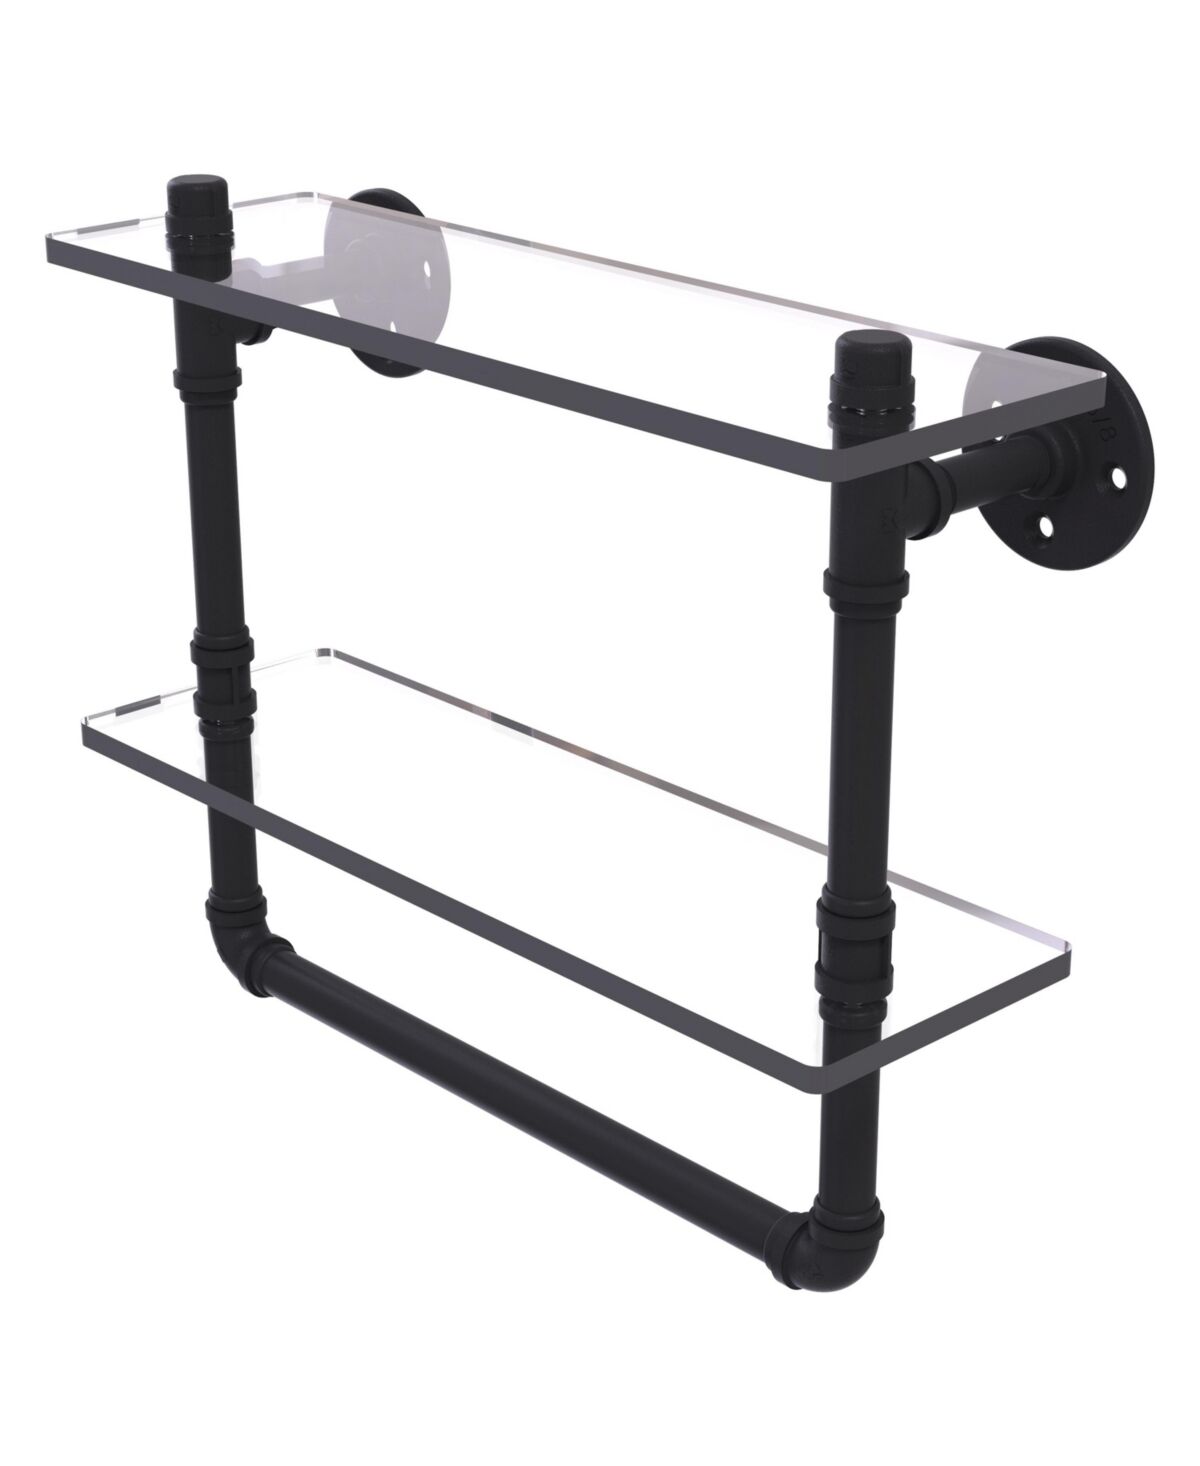 Allied Pipeline Collection 16 Inch Double Glass Shelf with Towel Bar - Matte black